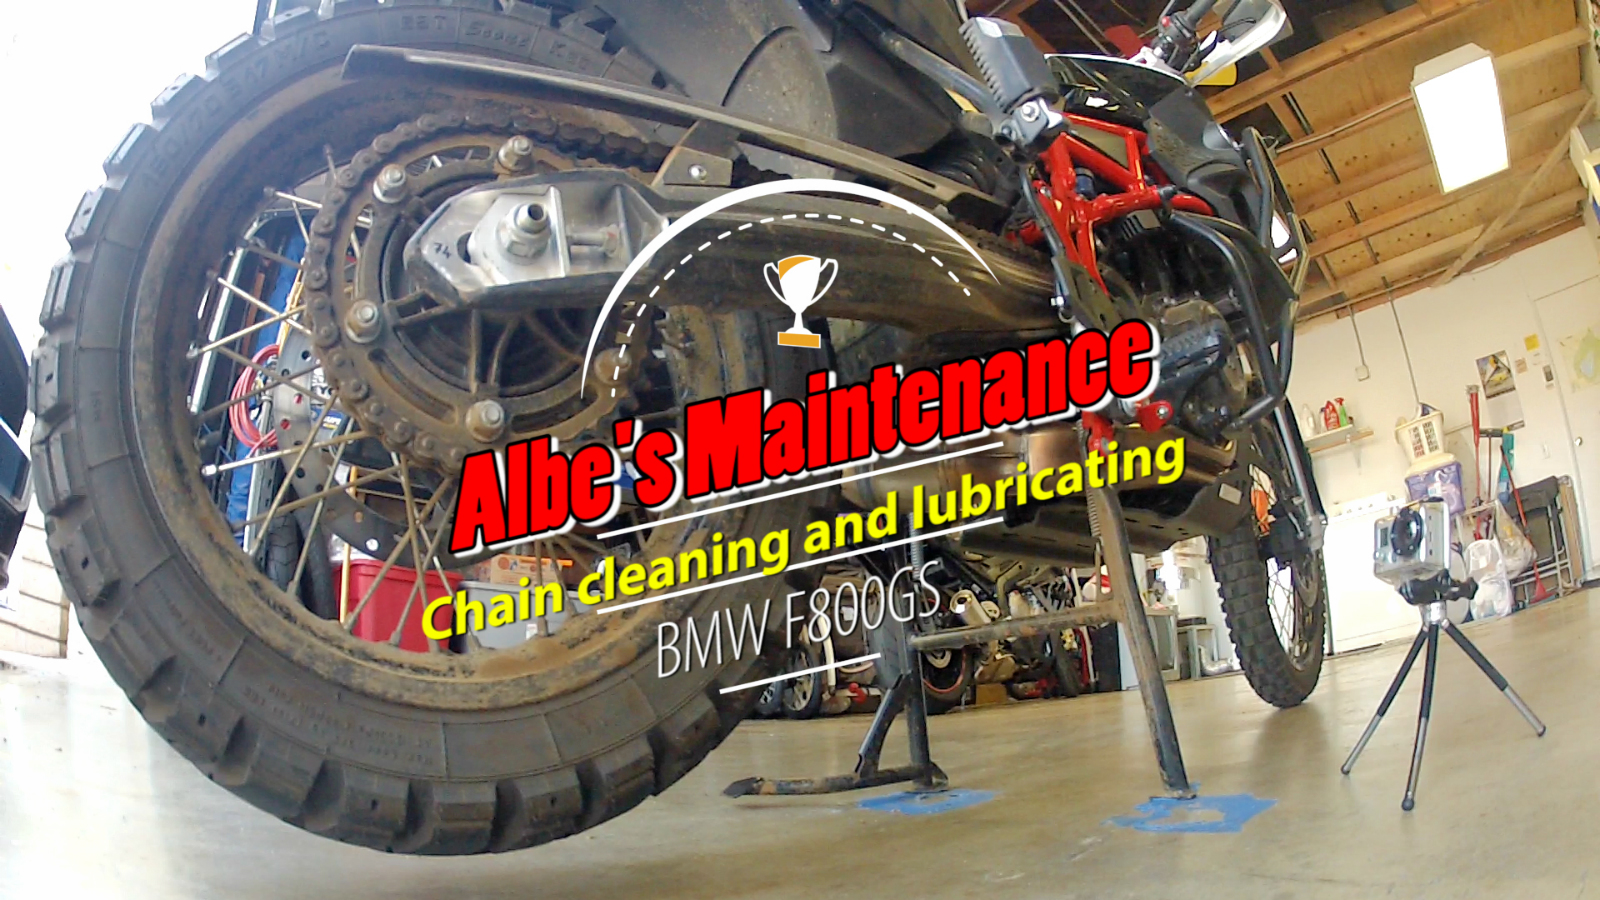 BMW F800GS, Albe's adv, adventure, motorcycle, maintenance, chain cleaning